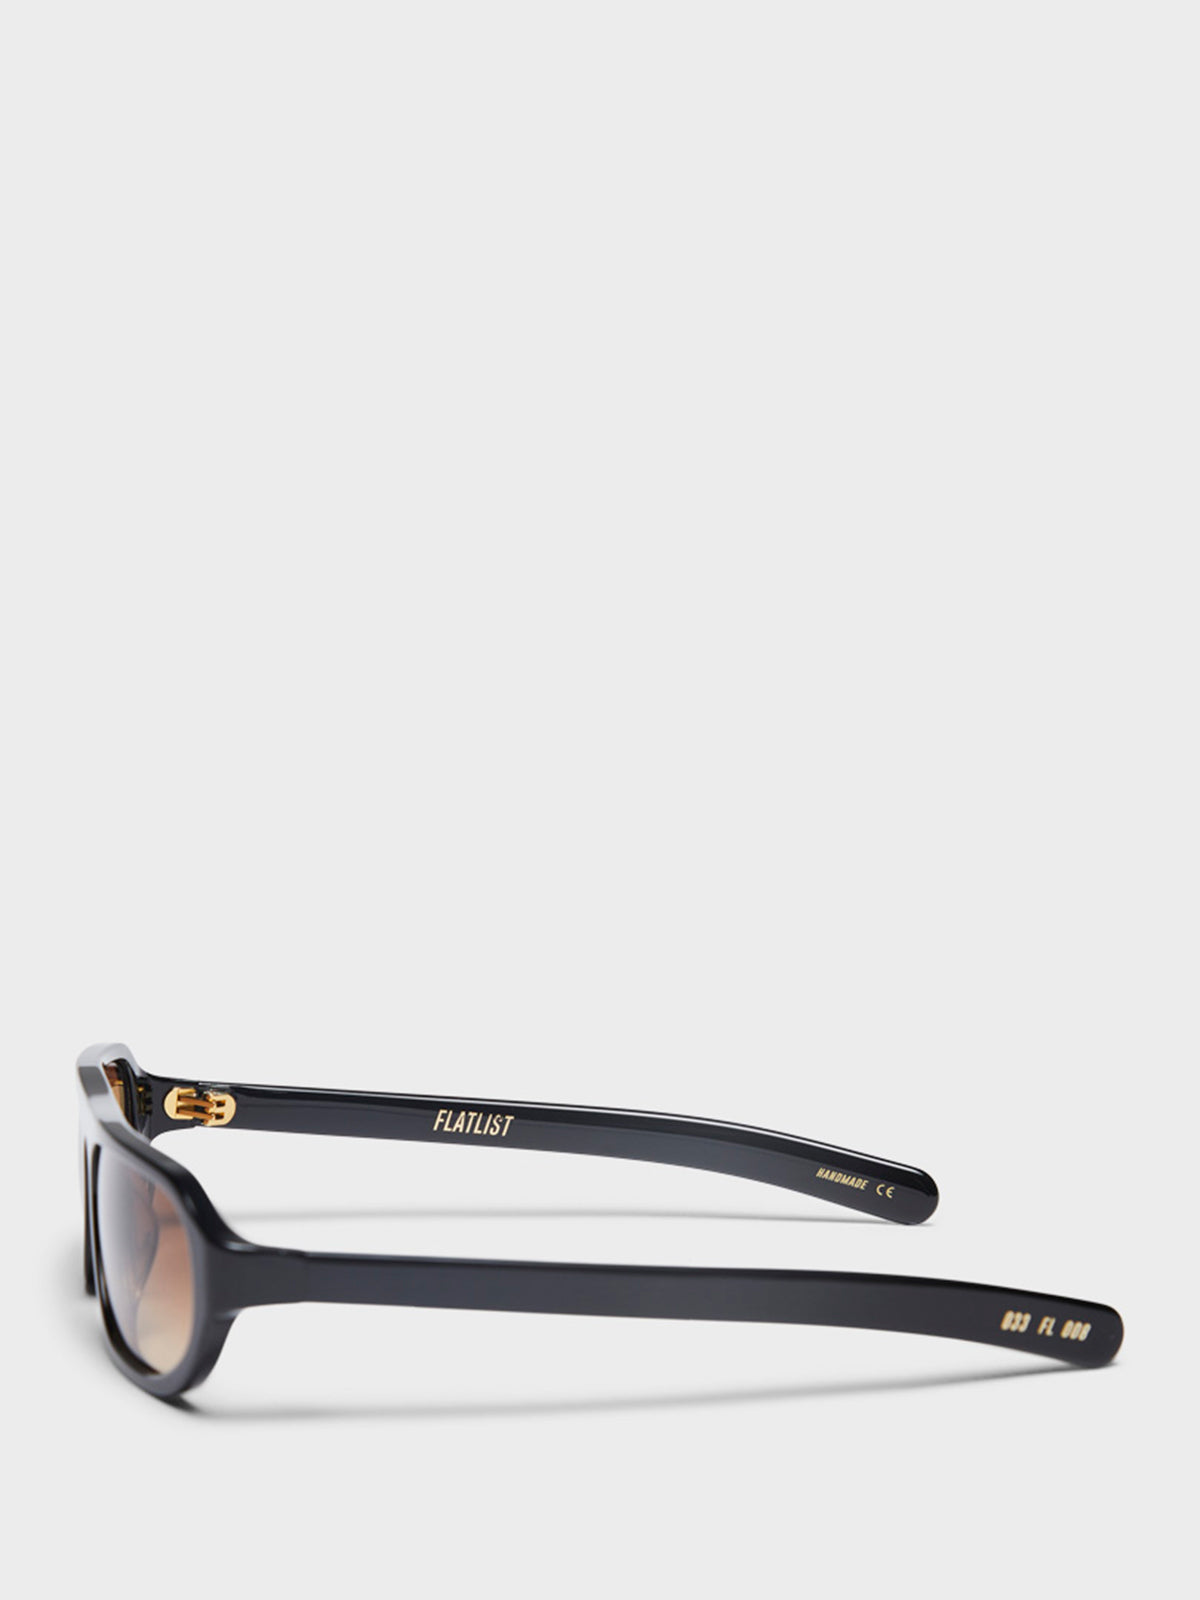 Penn Sunglasses in Solid Black and Brown Gradient Lens